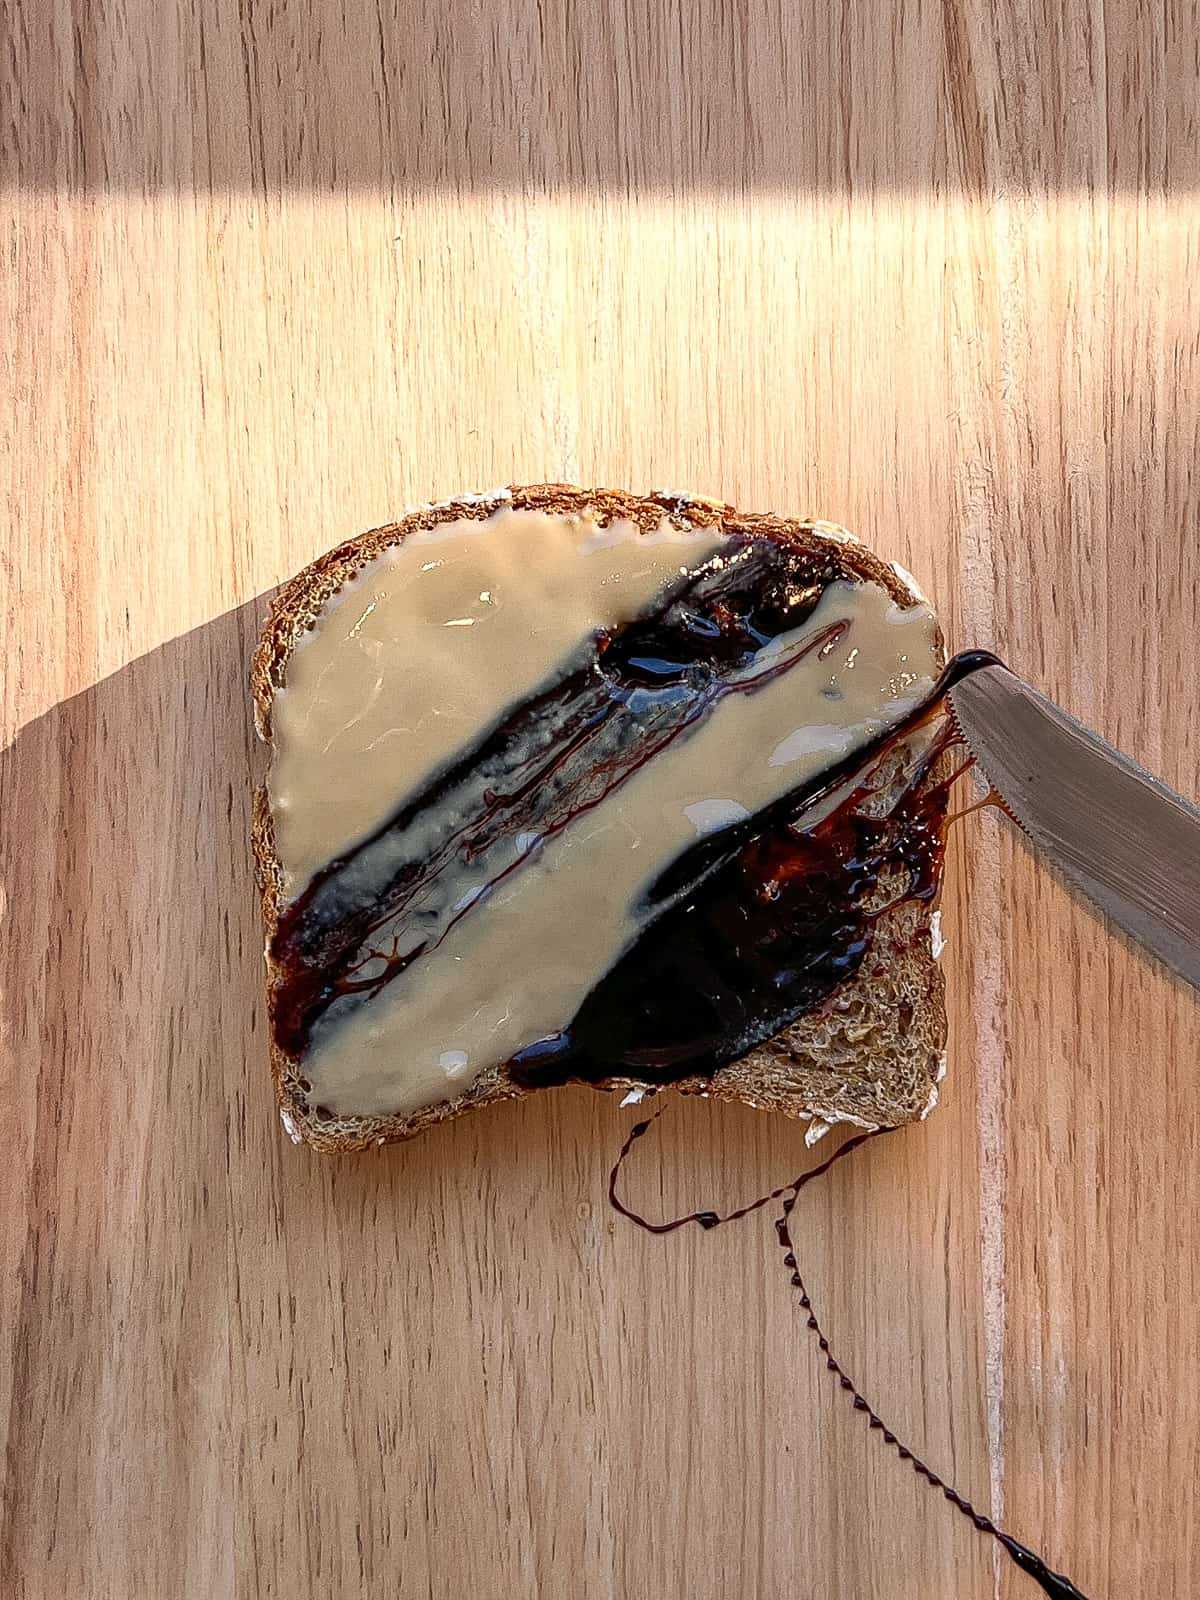 An image of date syryp being drizzled on toast.